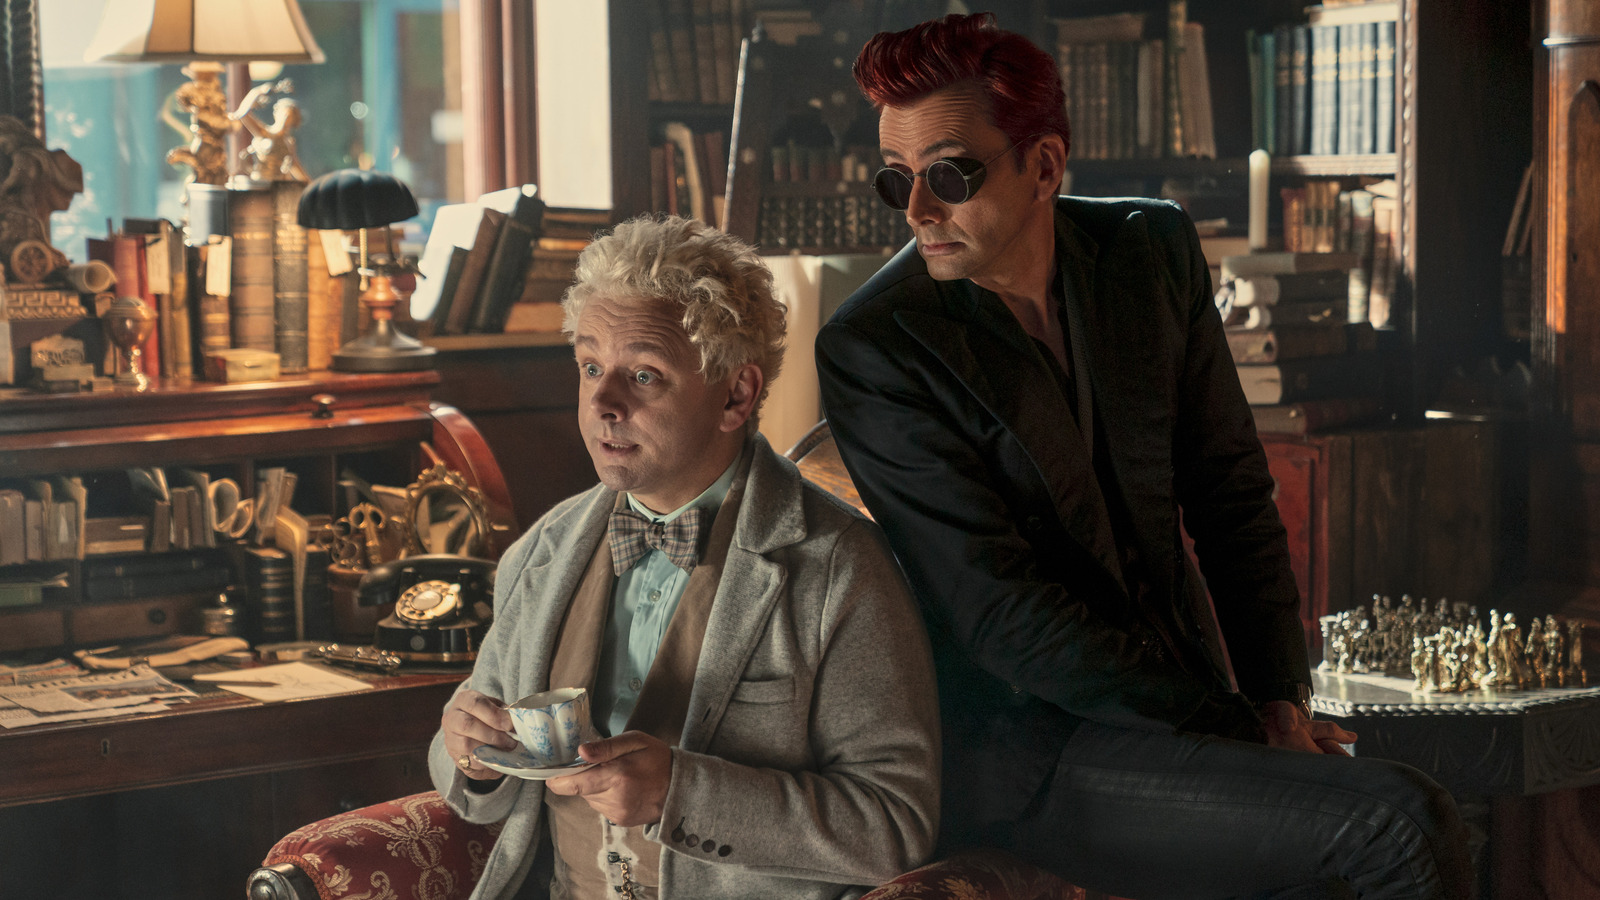 Neil Gaiman Has Good Omens Season 3 All Planned Out, But Will That Be The End?